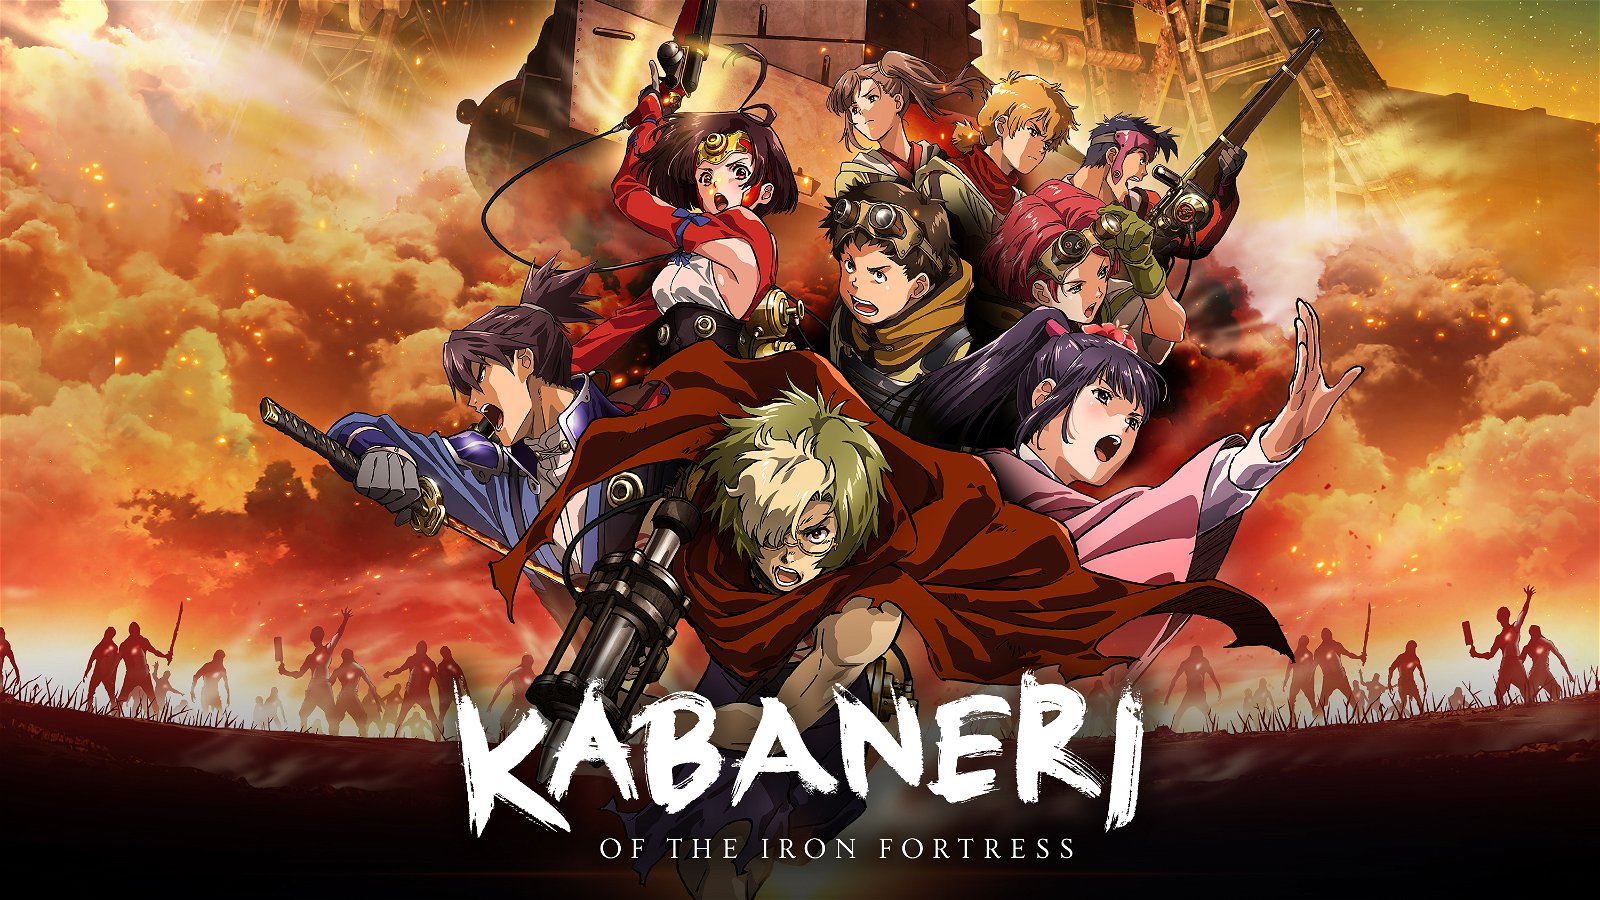 Kabaneri Of The Iron Fortress Receives Anime Film